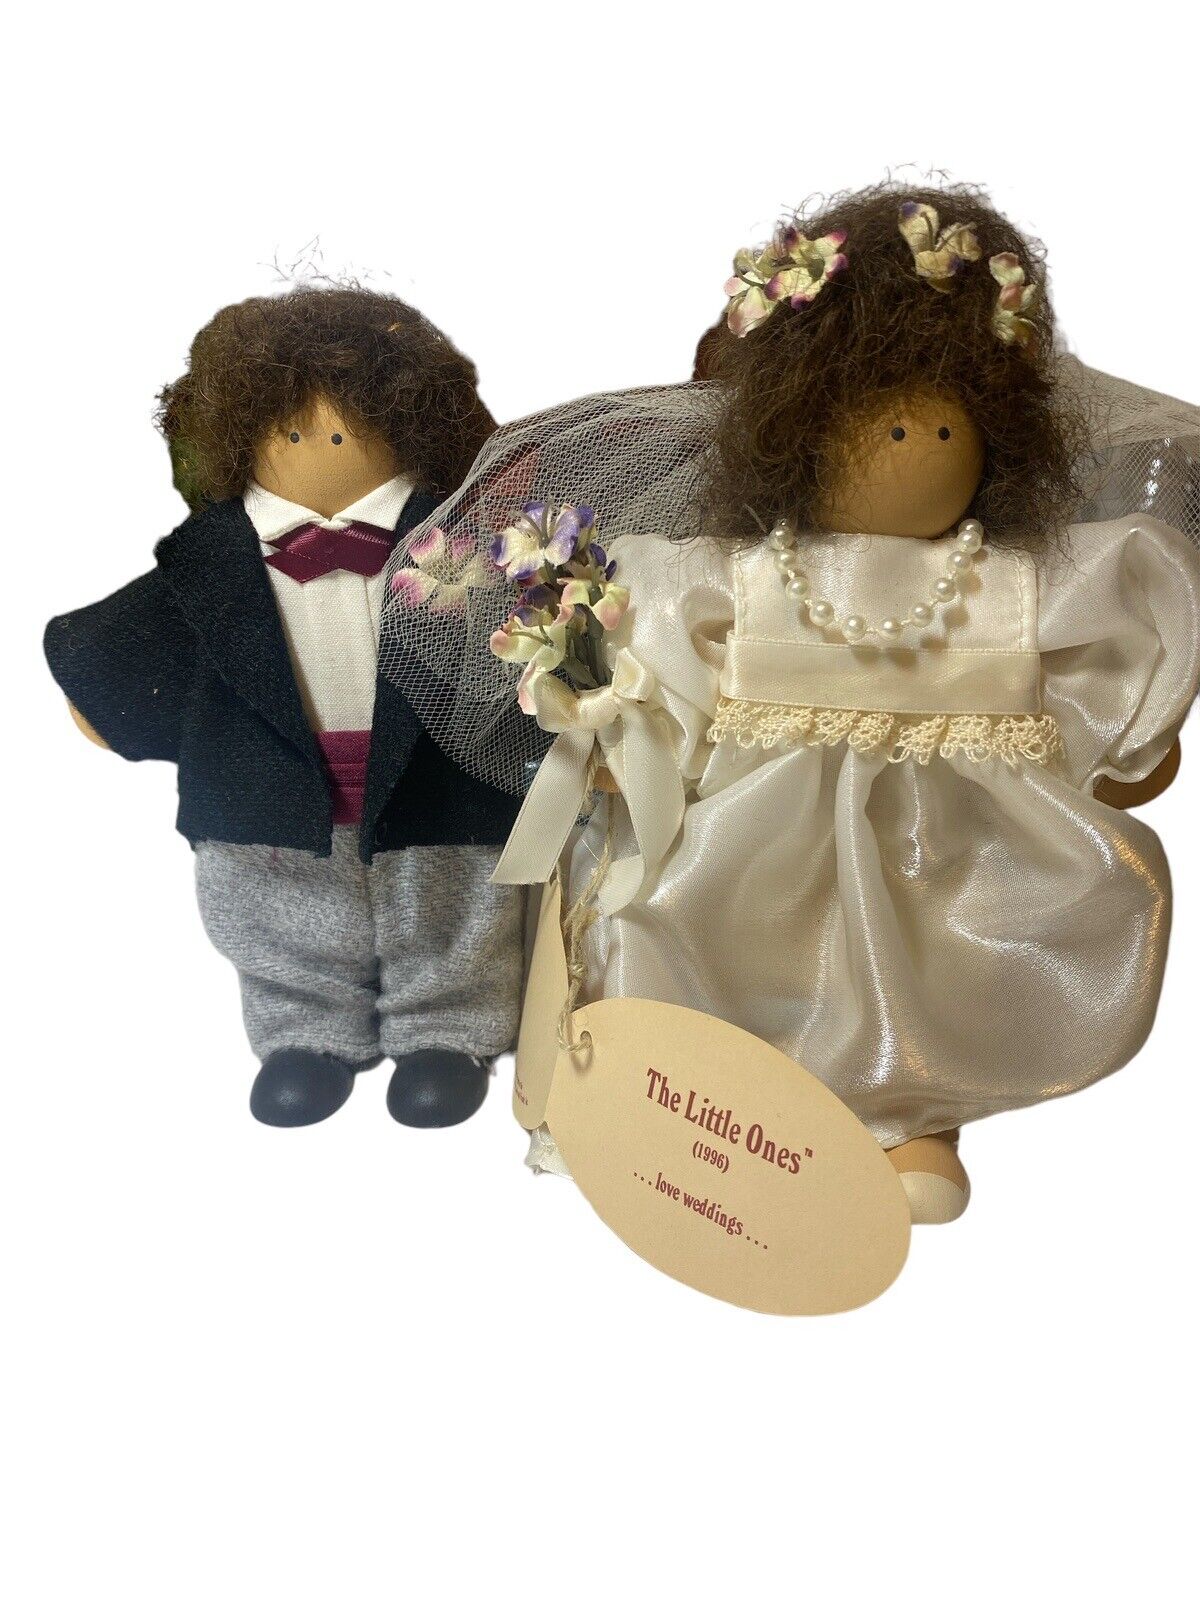 Lizzie High Handcrafted Wooden Dolls. “The Little Ones Love Weddings” 1996